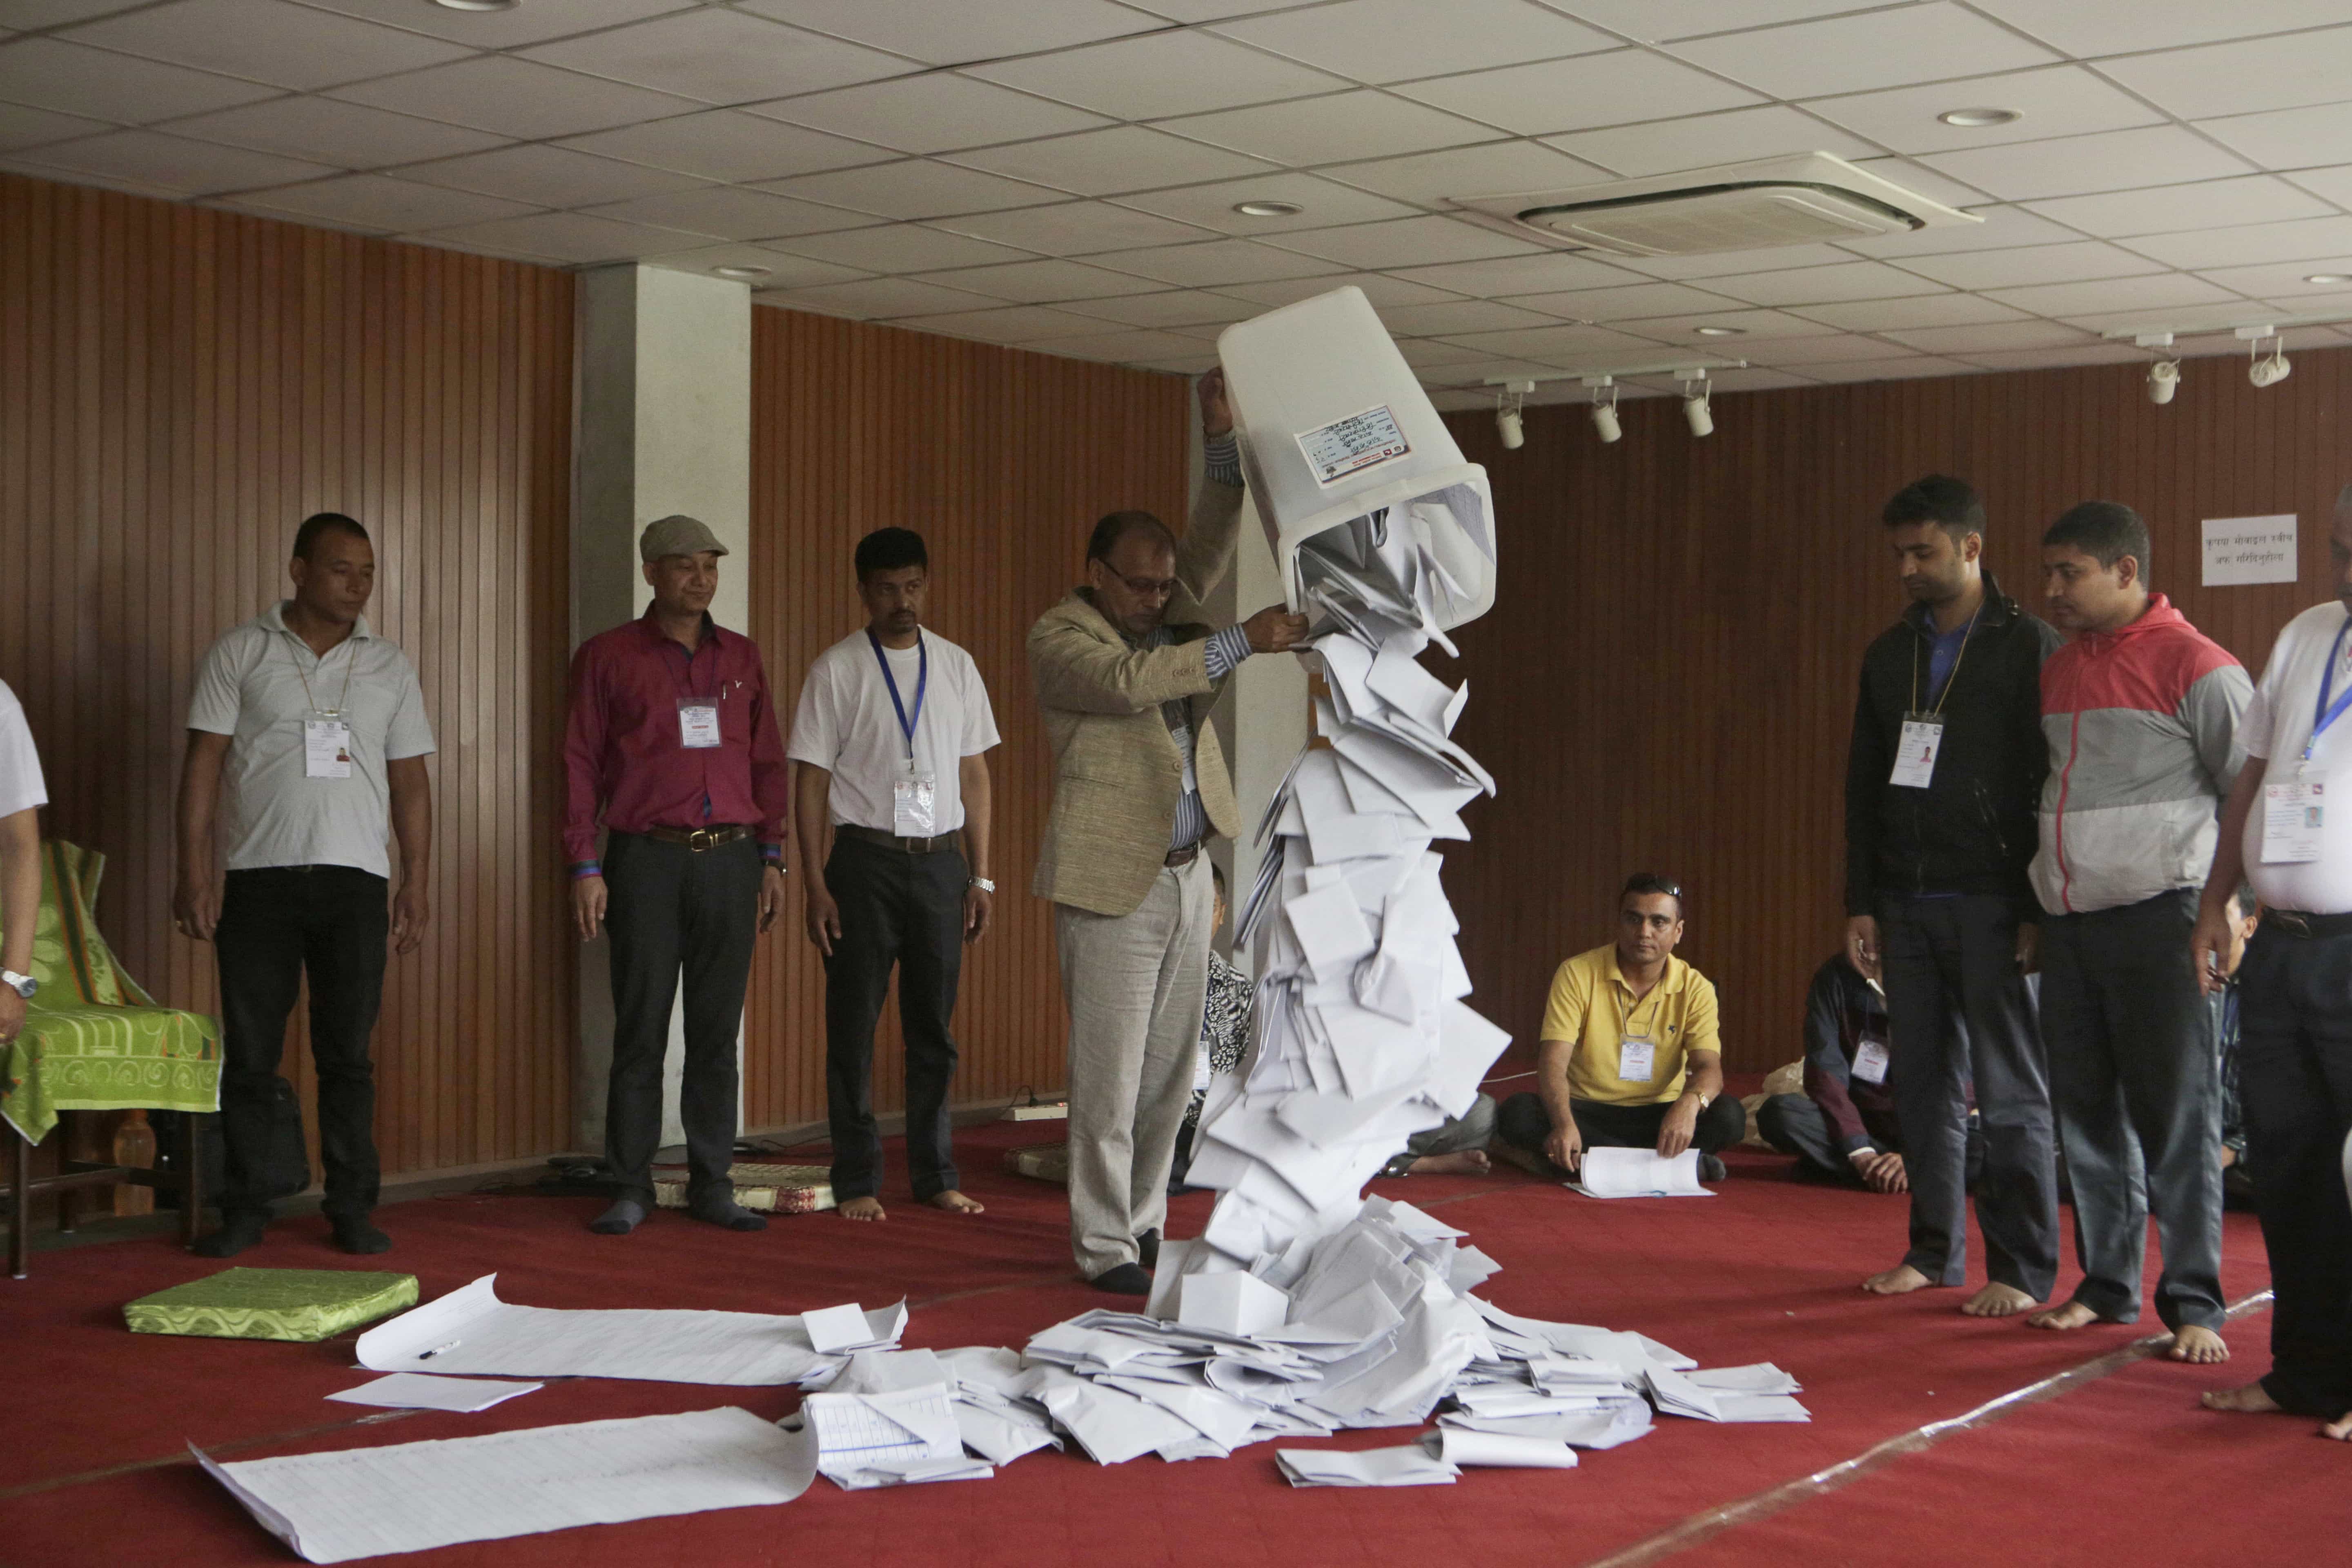 A Nepalese election commission officer empties a ballot box prior to counting the votes of local elections in Kathmandu, Nepal, 15 May 2017, AP Photo/Niranjan Shrestha